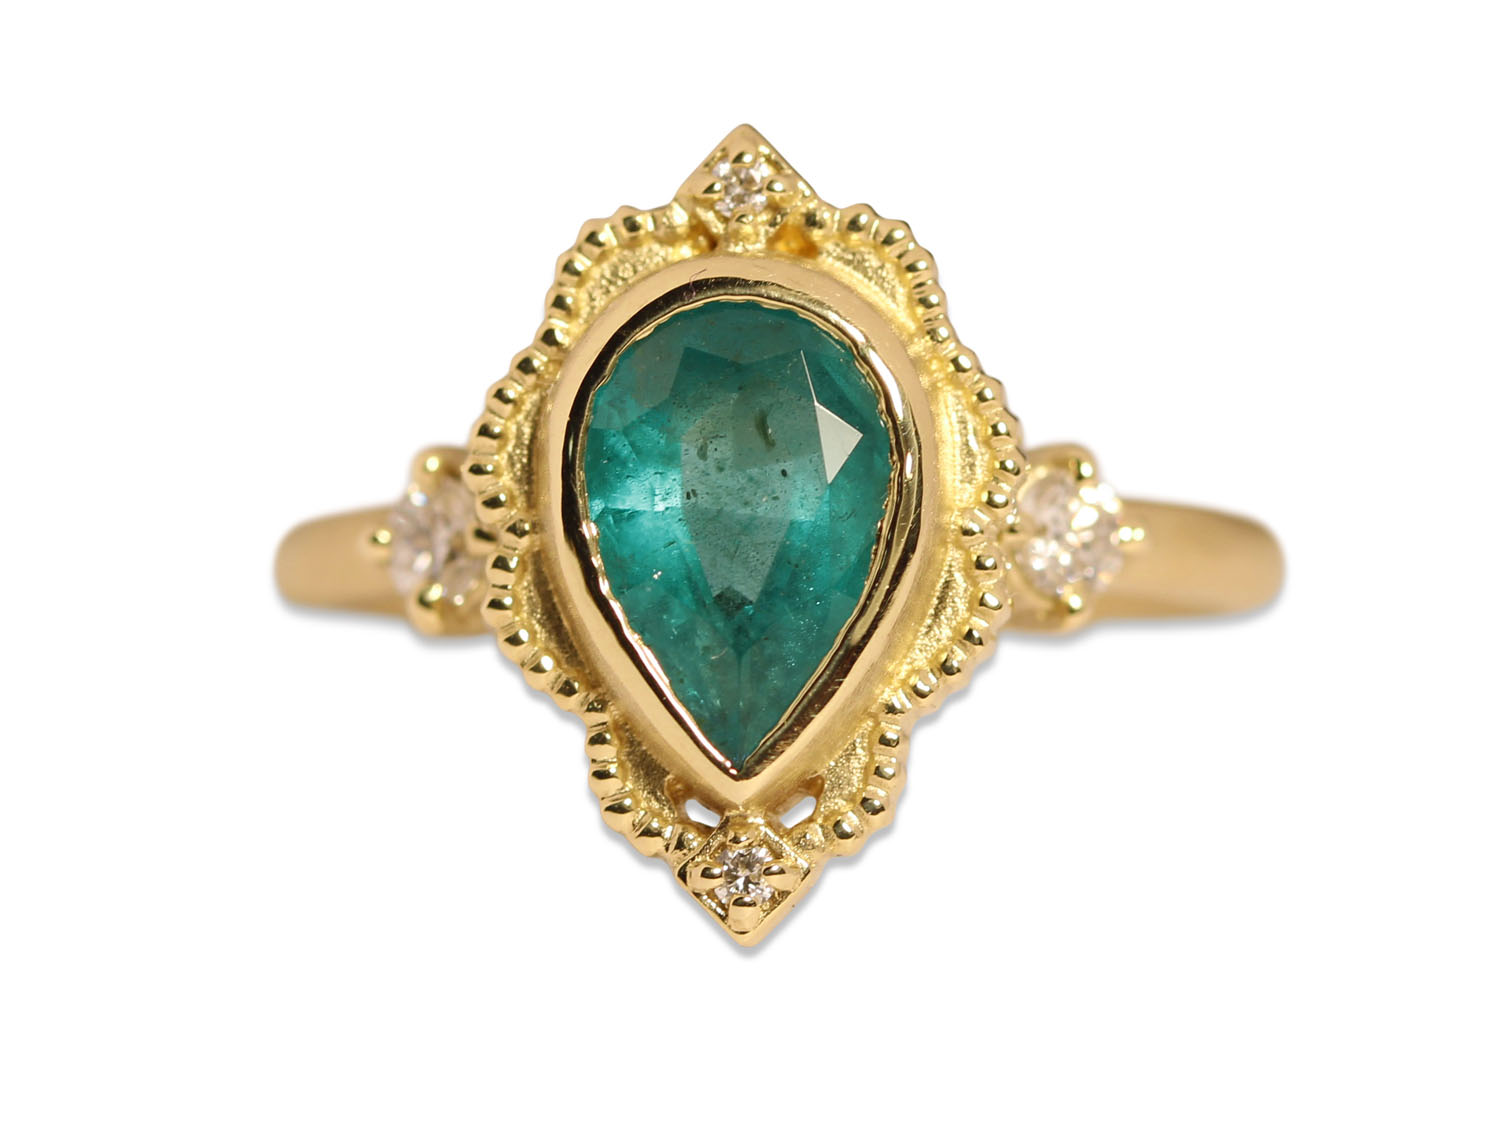 Vintage-Inspired Emerald and Diamond Venise Frame Ring